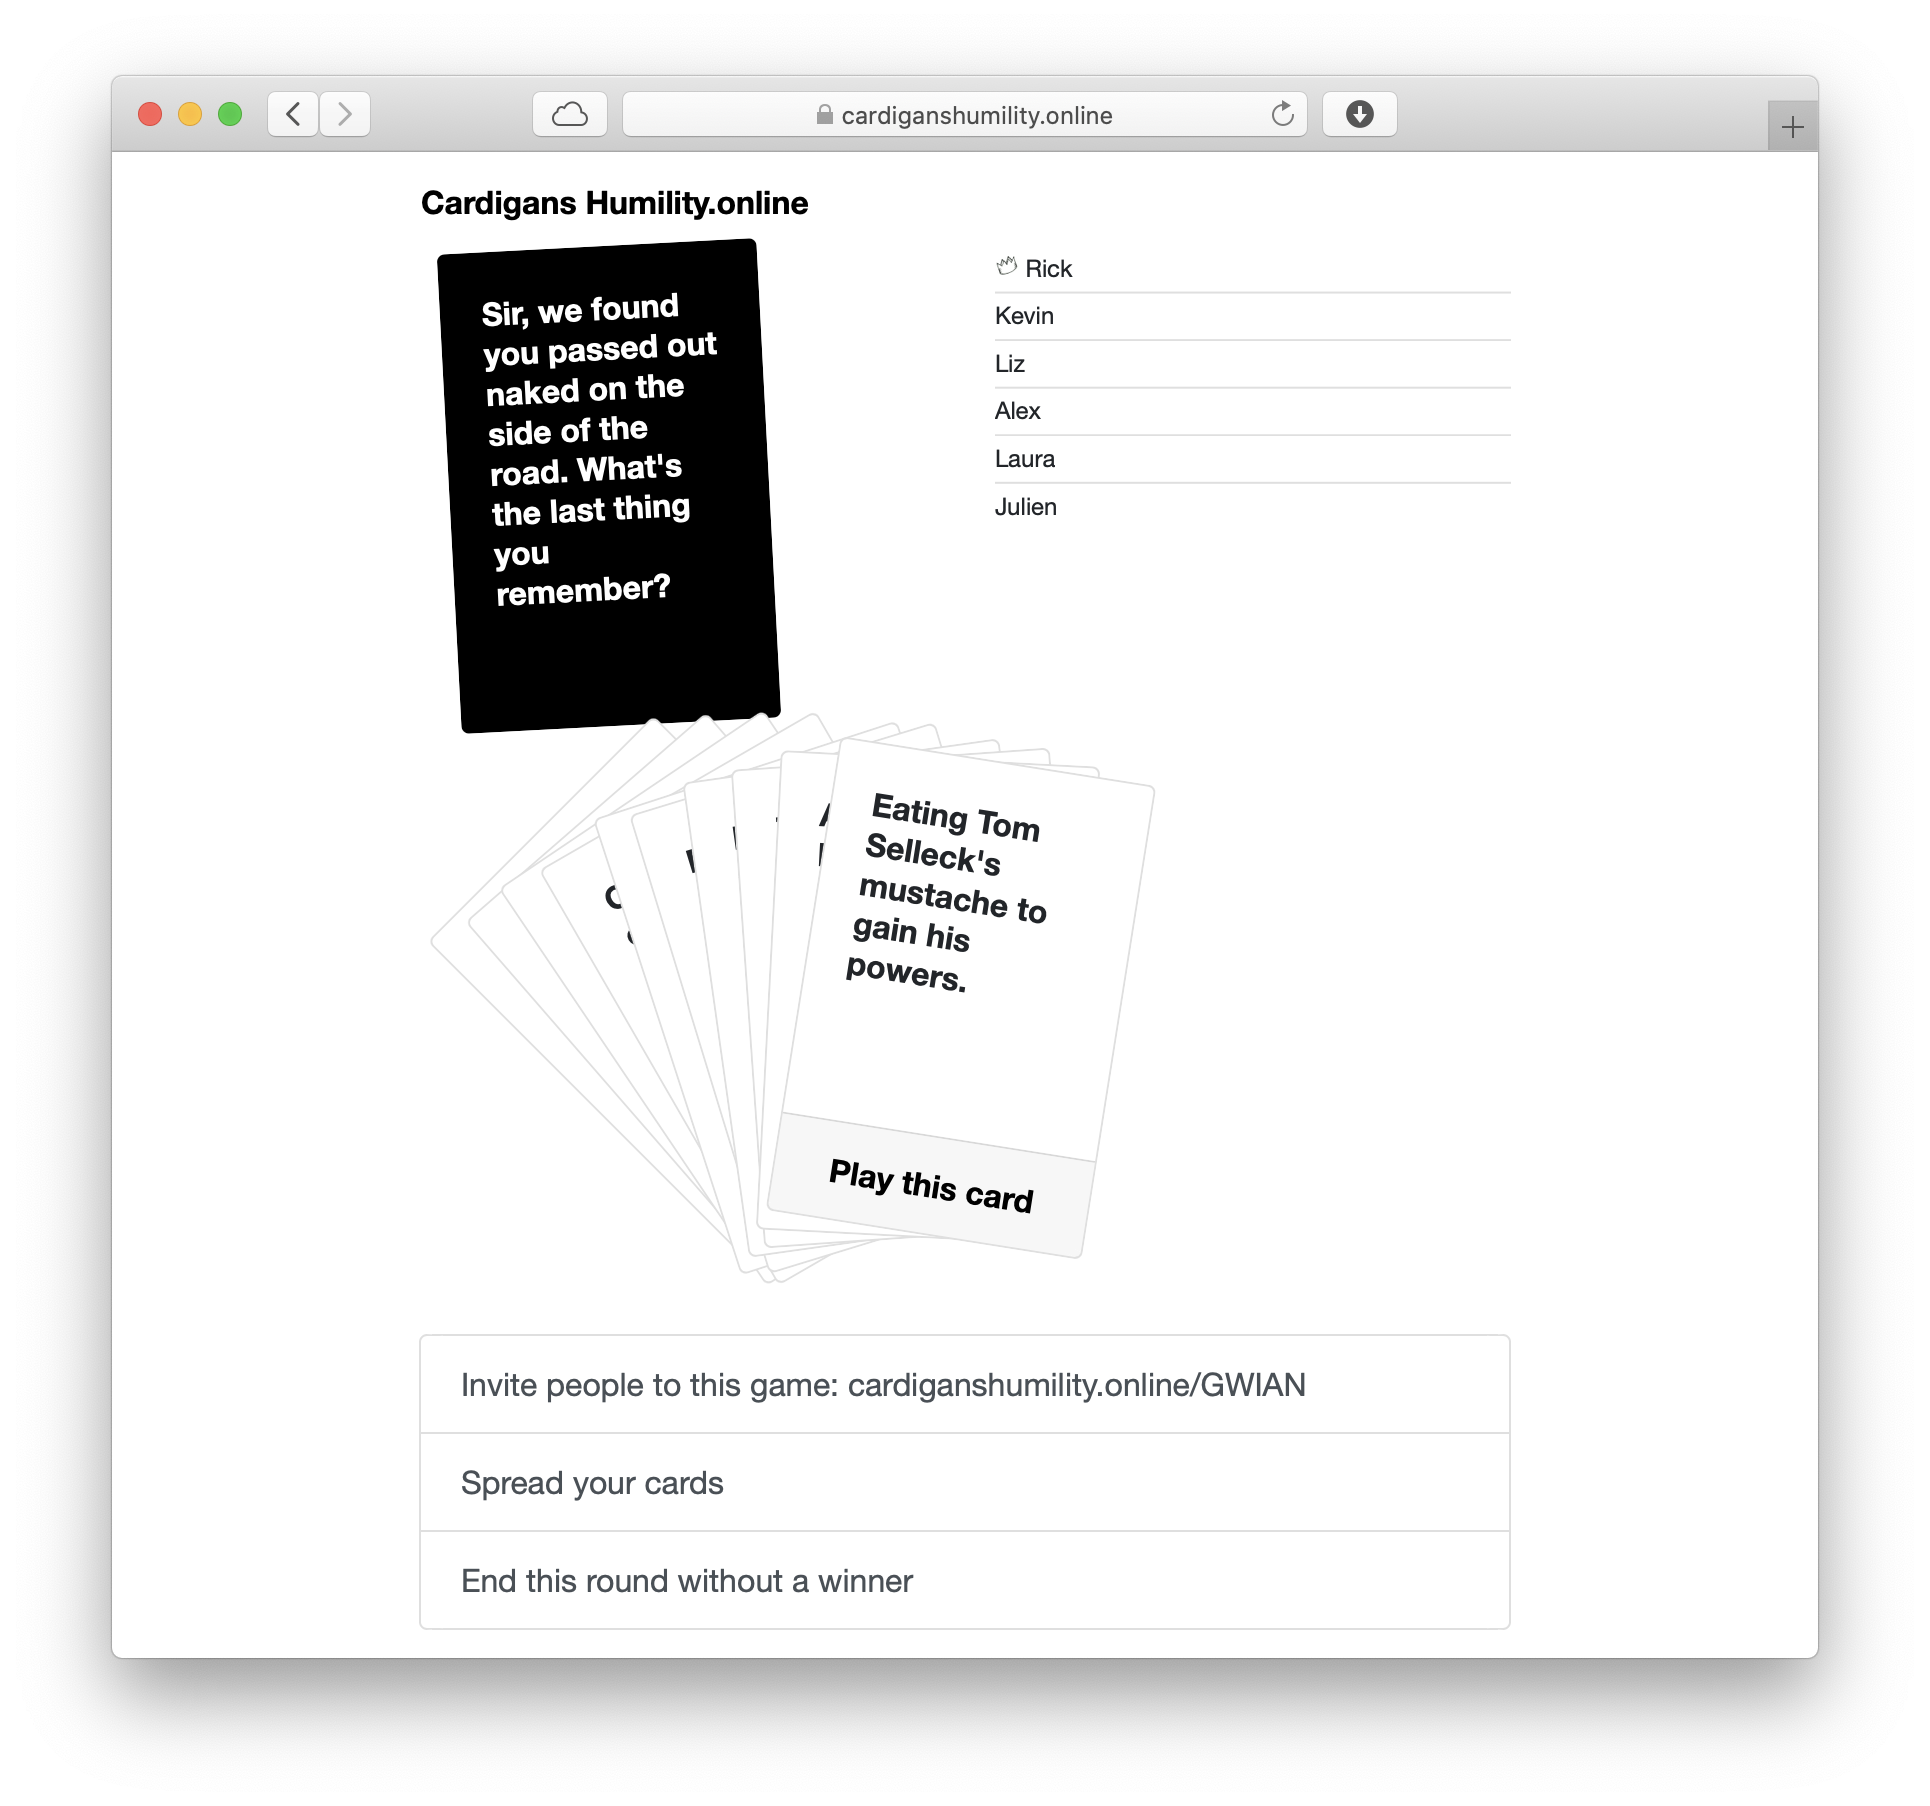 Game page. A black card with the text 'Sir, we found you passed out naked on the side of the road. What's the last thing you remember?' The player is about to play their card 'Eating Tom Selleck's mustache to gain his powers.'